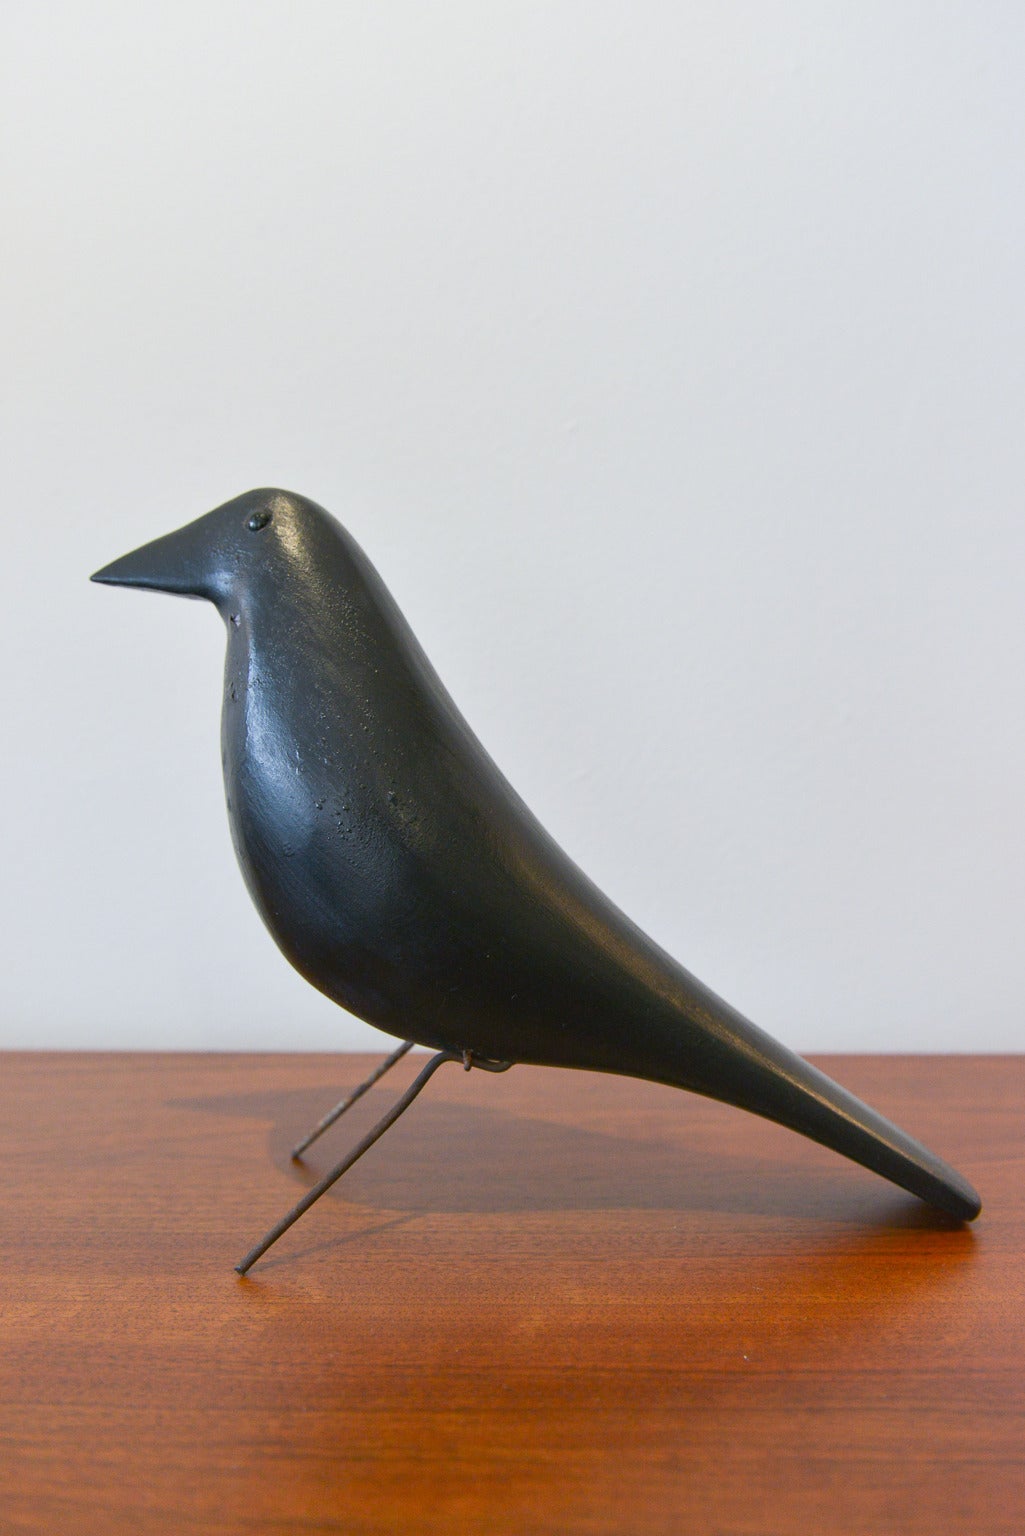 Vintage hand carved wooden crow decoy attributed to Charles Perdew of Illinois.  This vintage bird has glass eyes, wire legs and is hand carved.  

Came from an estate in Central Illinois, the 'Eames House Bird' is an iconic piece of mid century